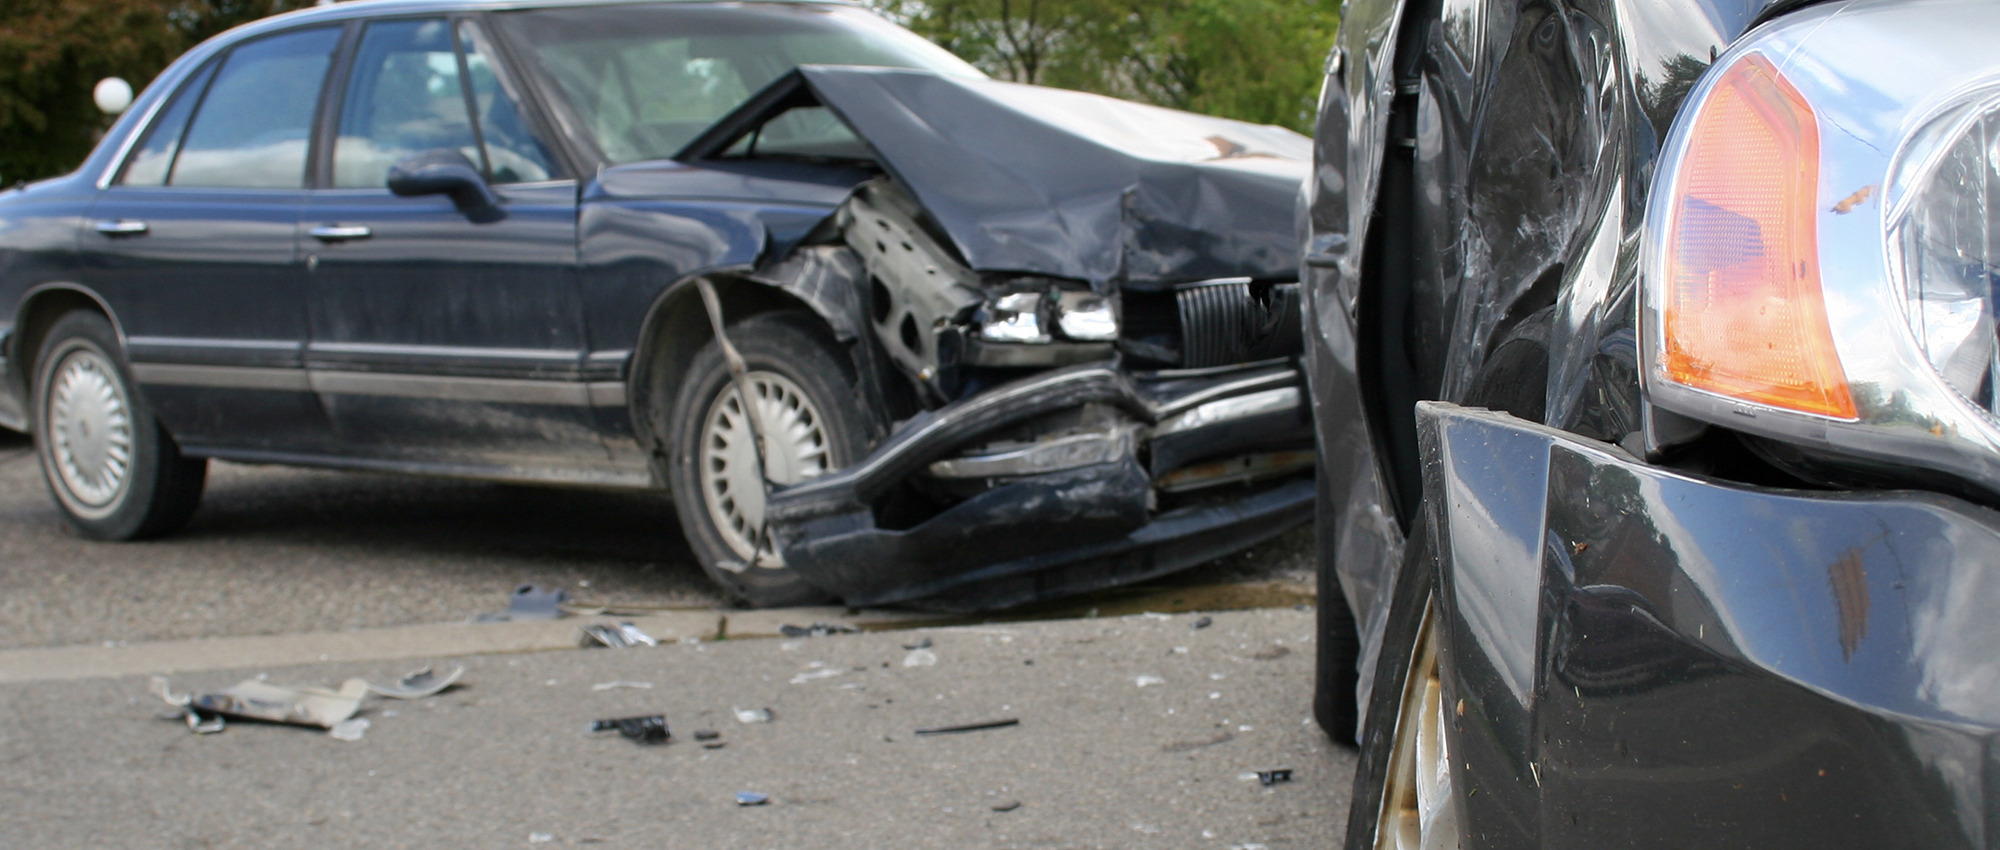 Types Of Accidents In The Myrtle Beach Area